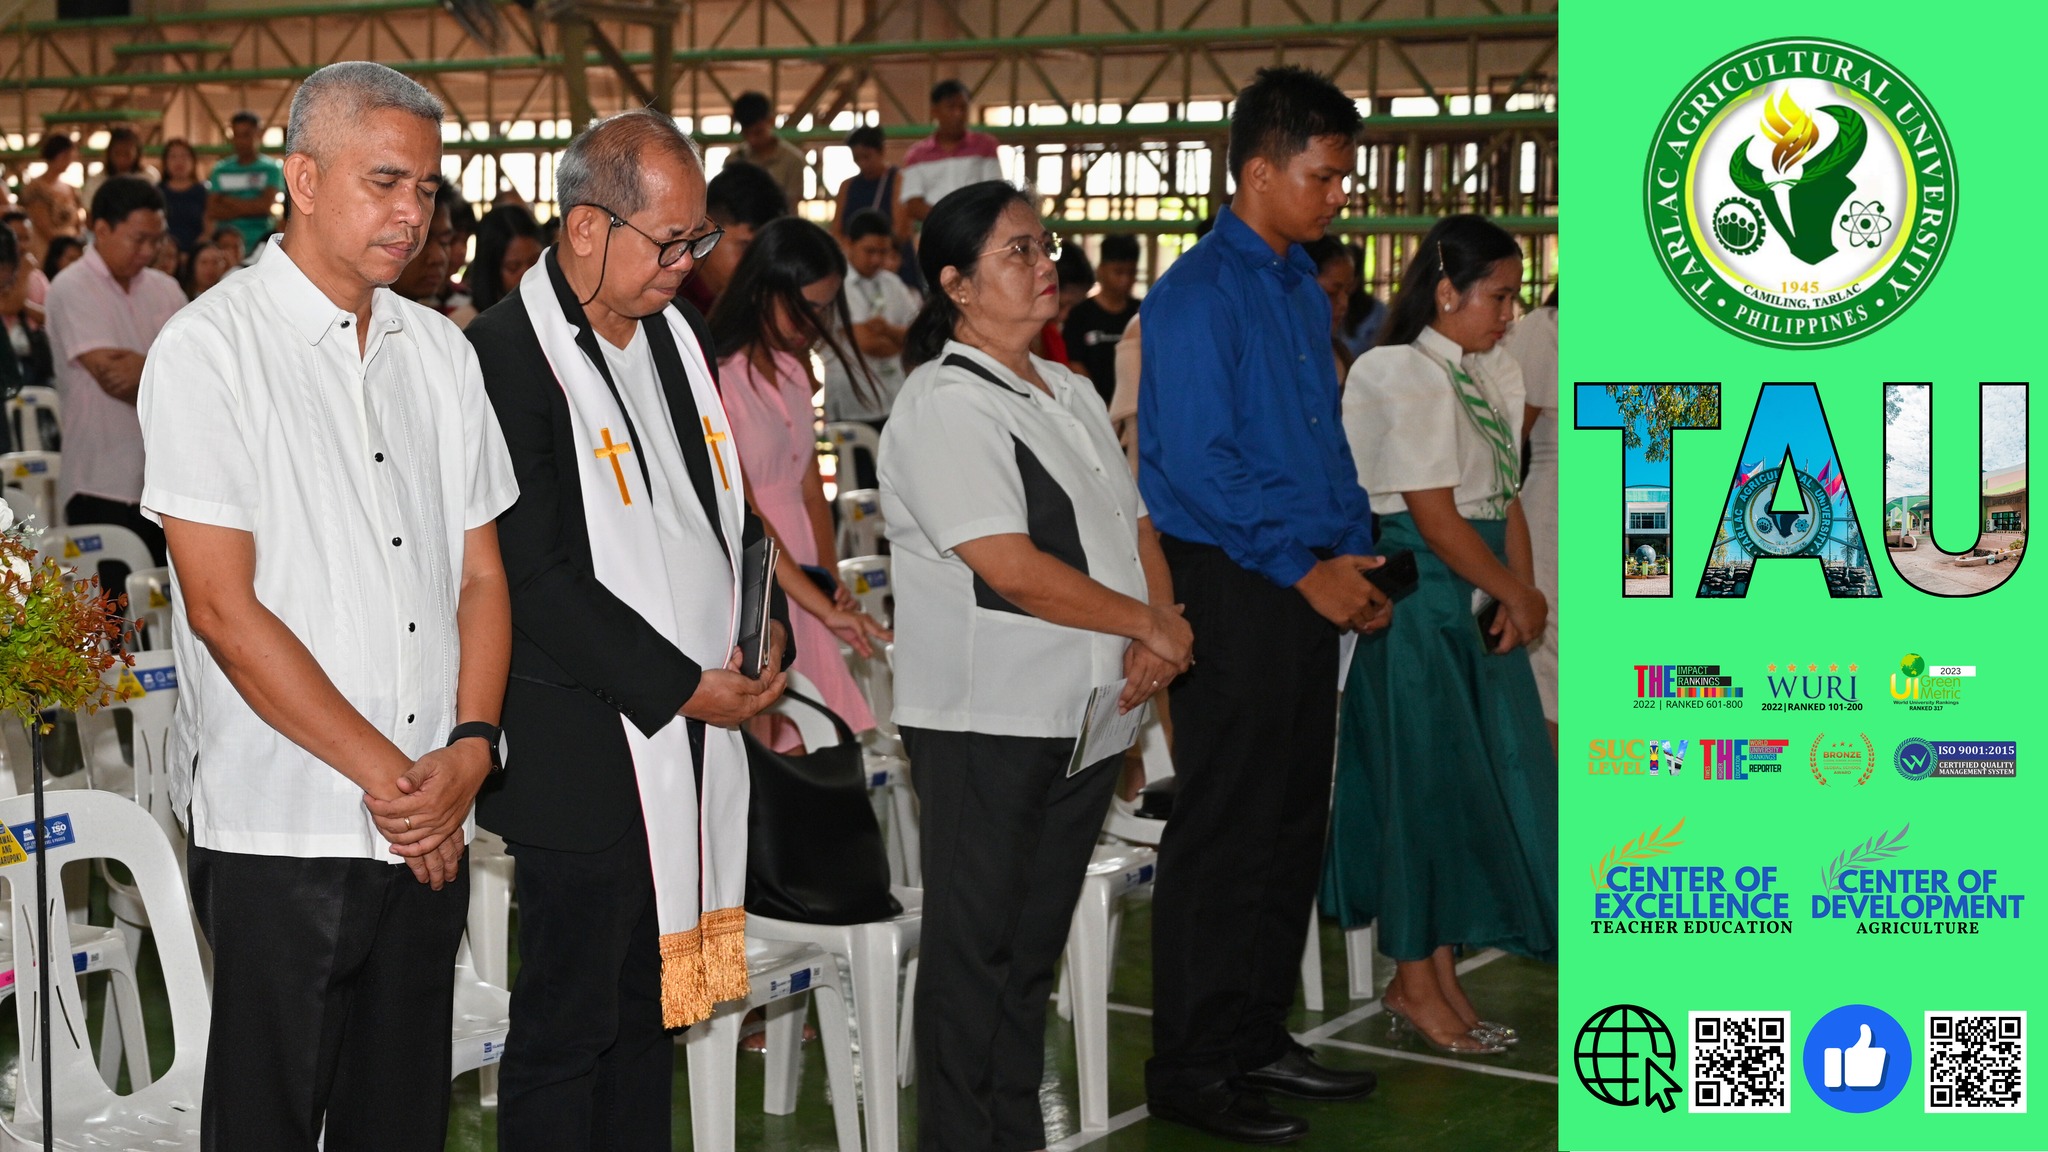 𝐂𝐀𝐏𝐓𝐔𝐑𝐄𝐃 𝐈𝐍 𝐋𝐄𝐍𝐒 | Recipients of Academic and Proficiency Awards from the six colleges of Tarlac Agricultural University (TAU) assemble at the Gilberto O. Teodoro Multipurpose Hall